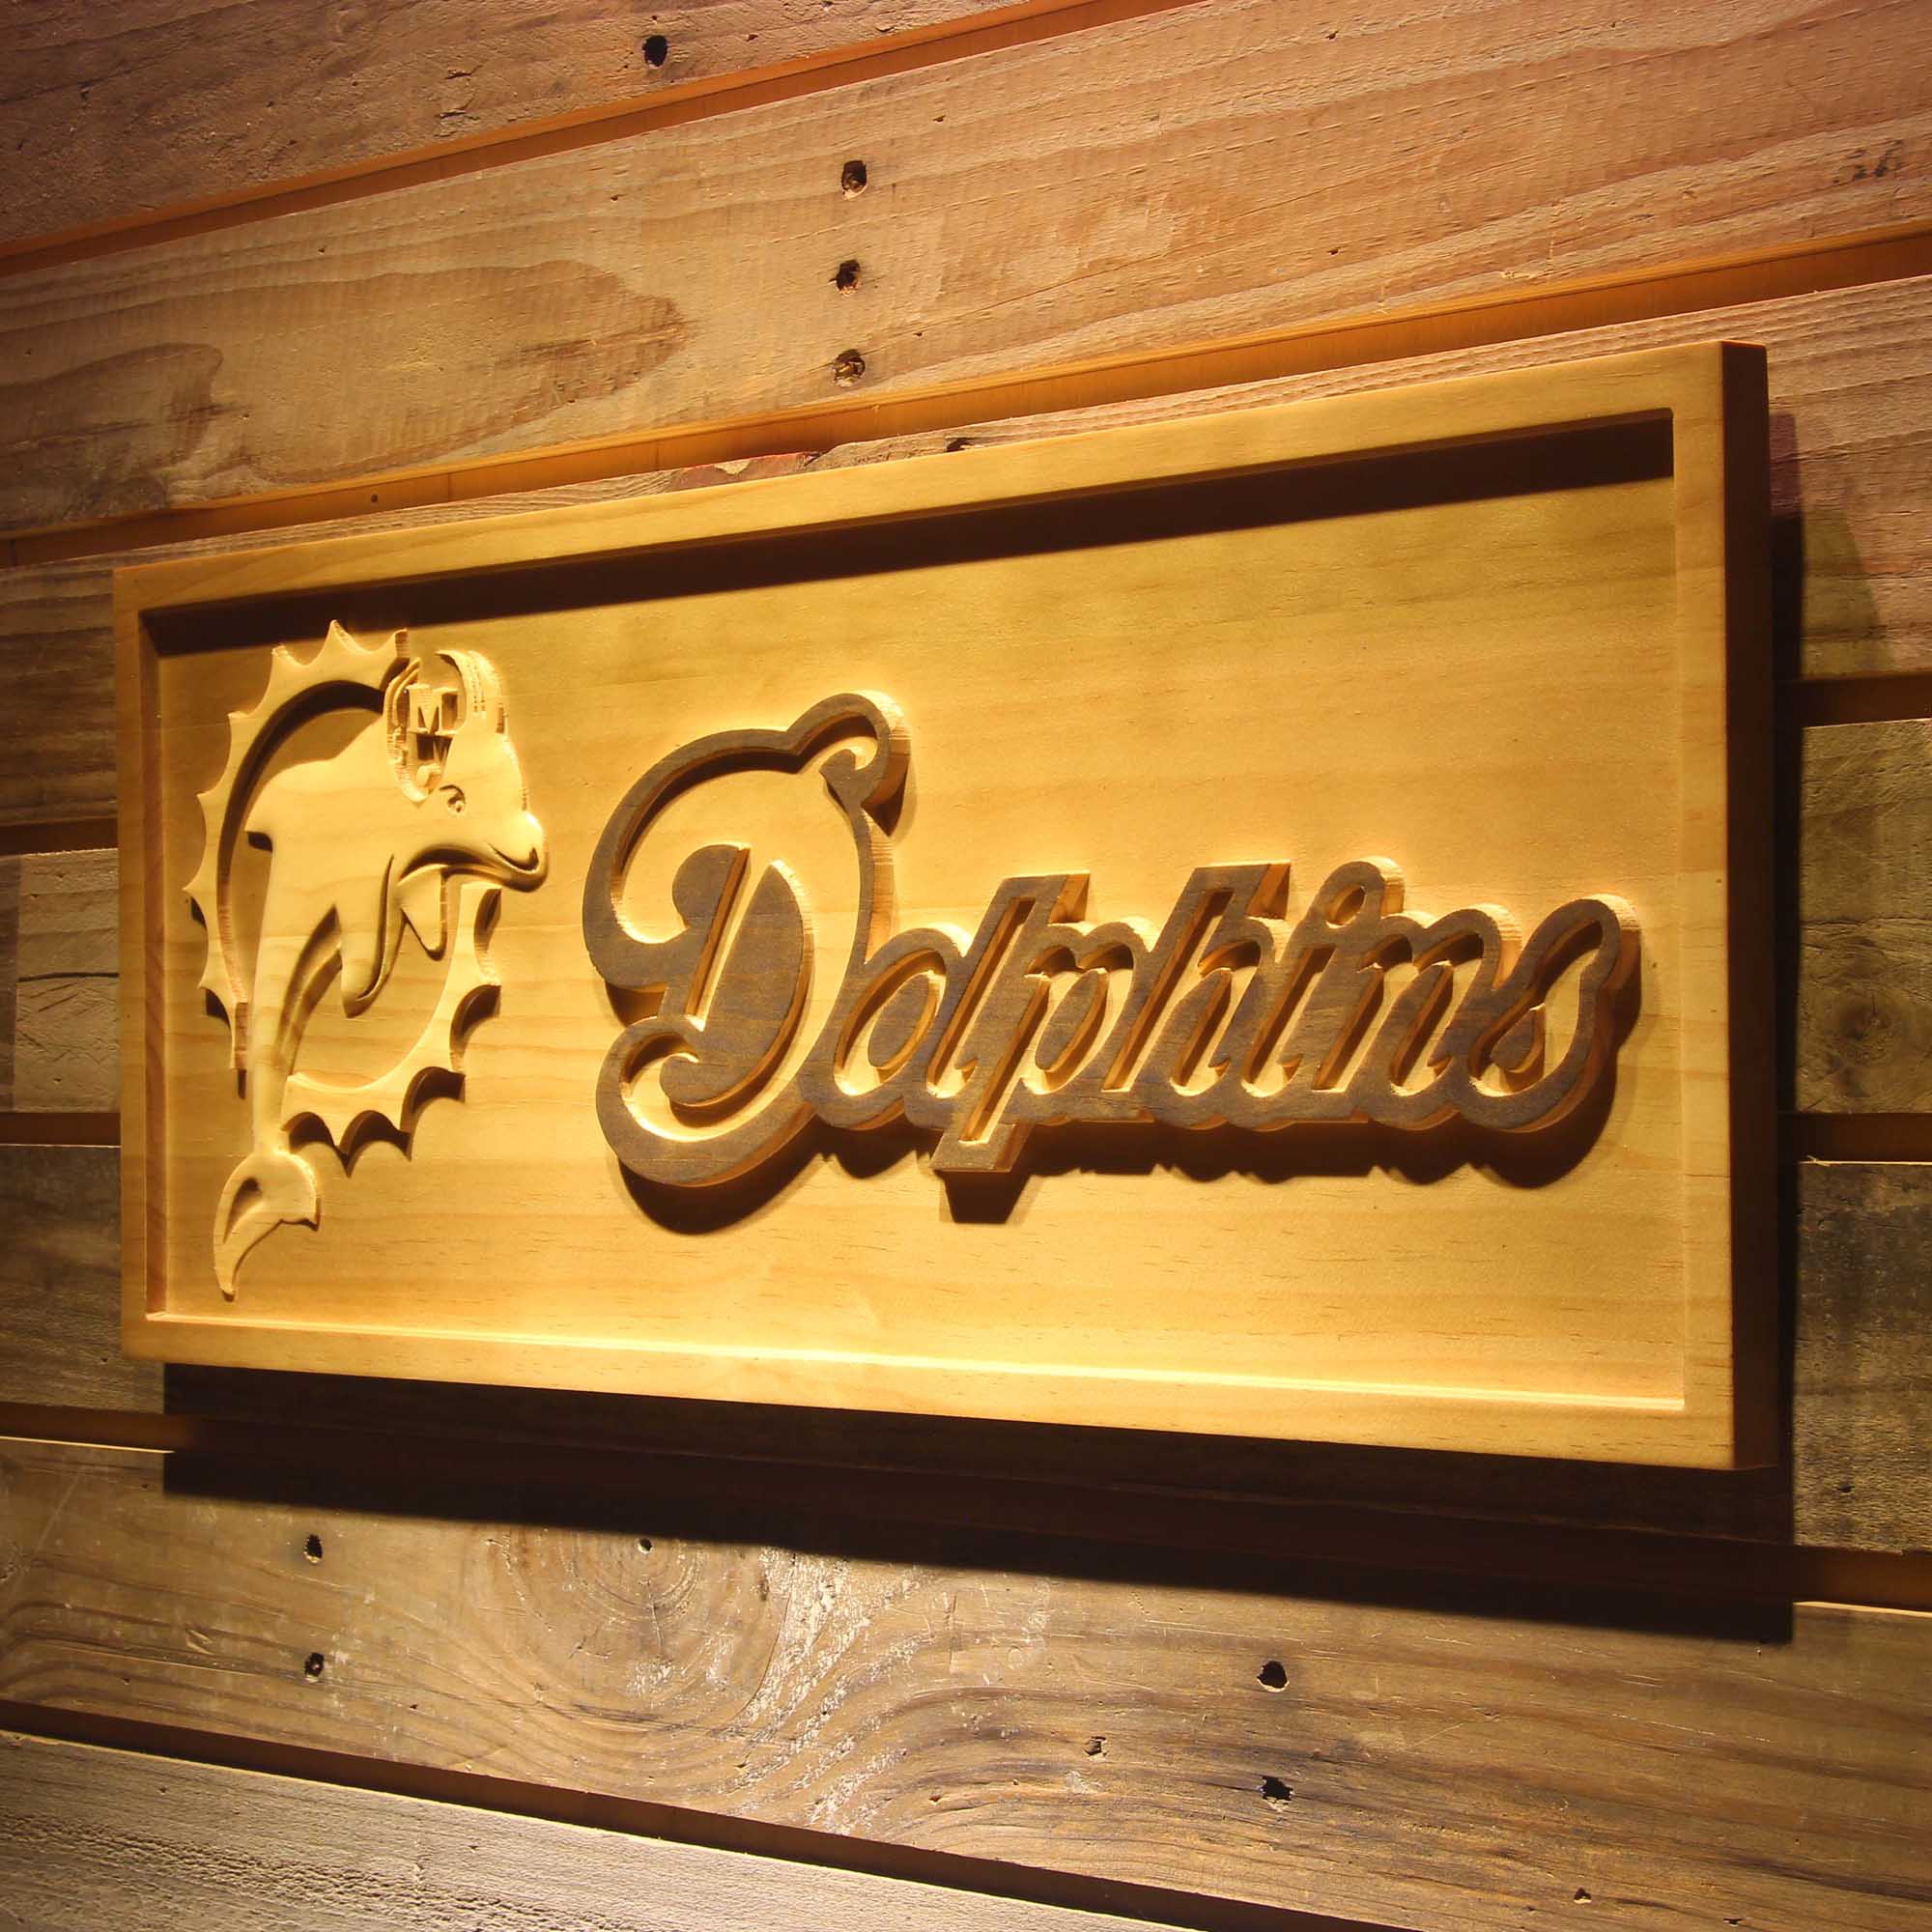 Miami Dolphins 3D Wooden Engrave Sign